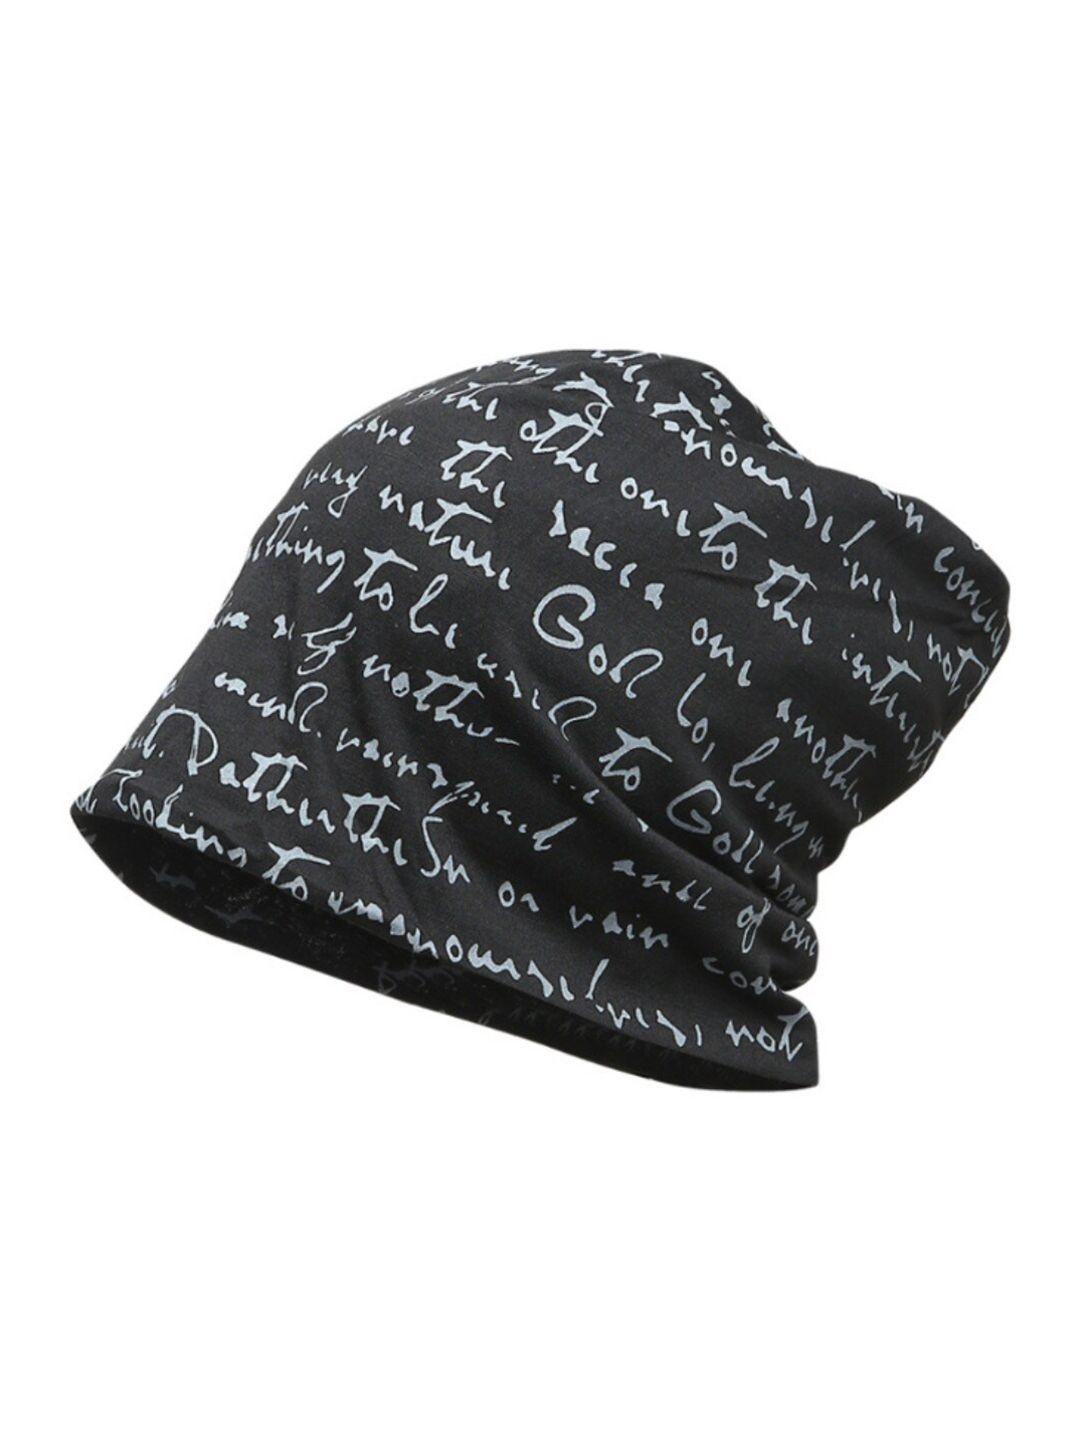 isweven printed cotton beanie cap